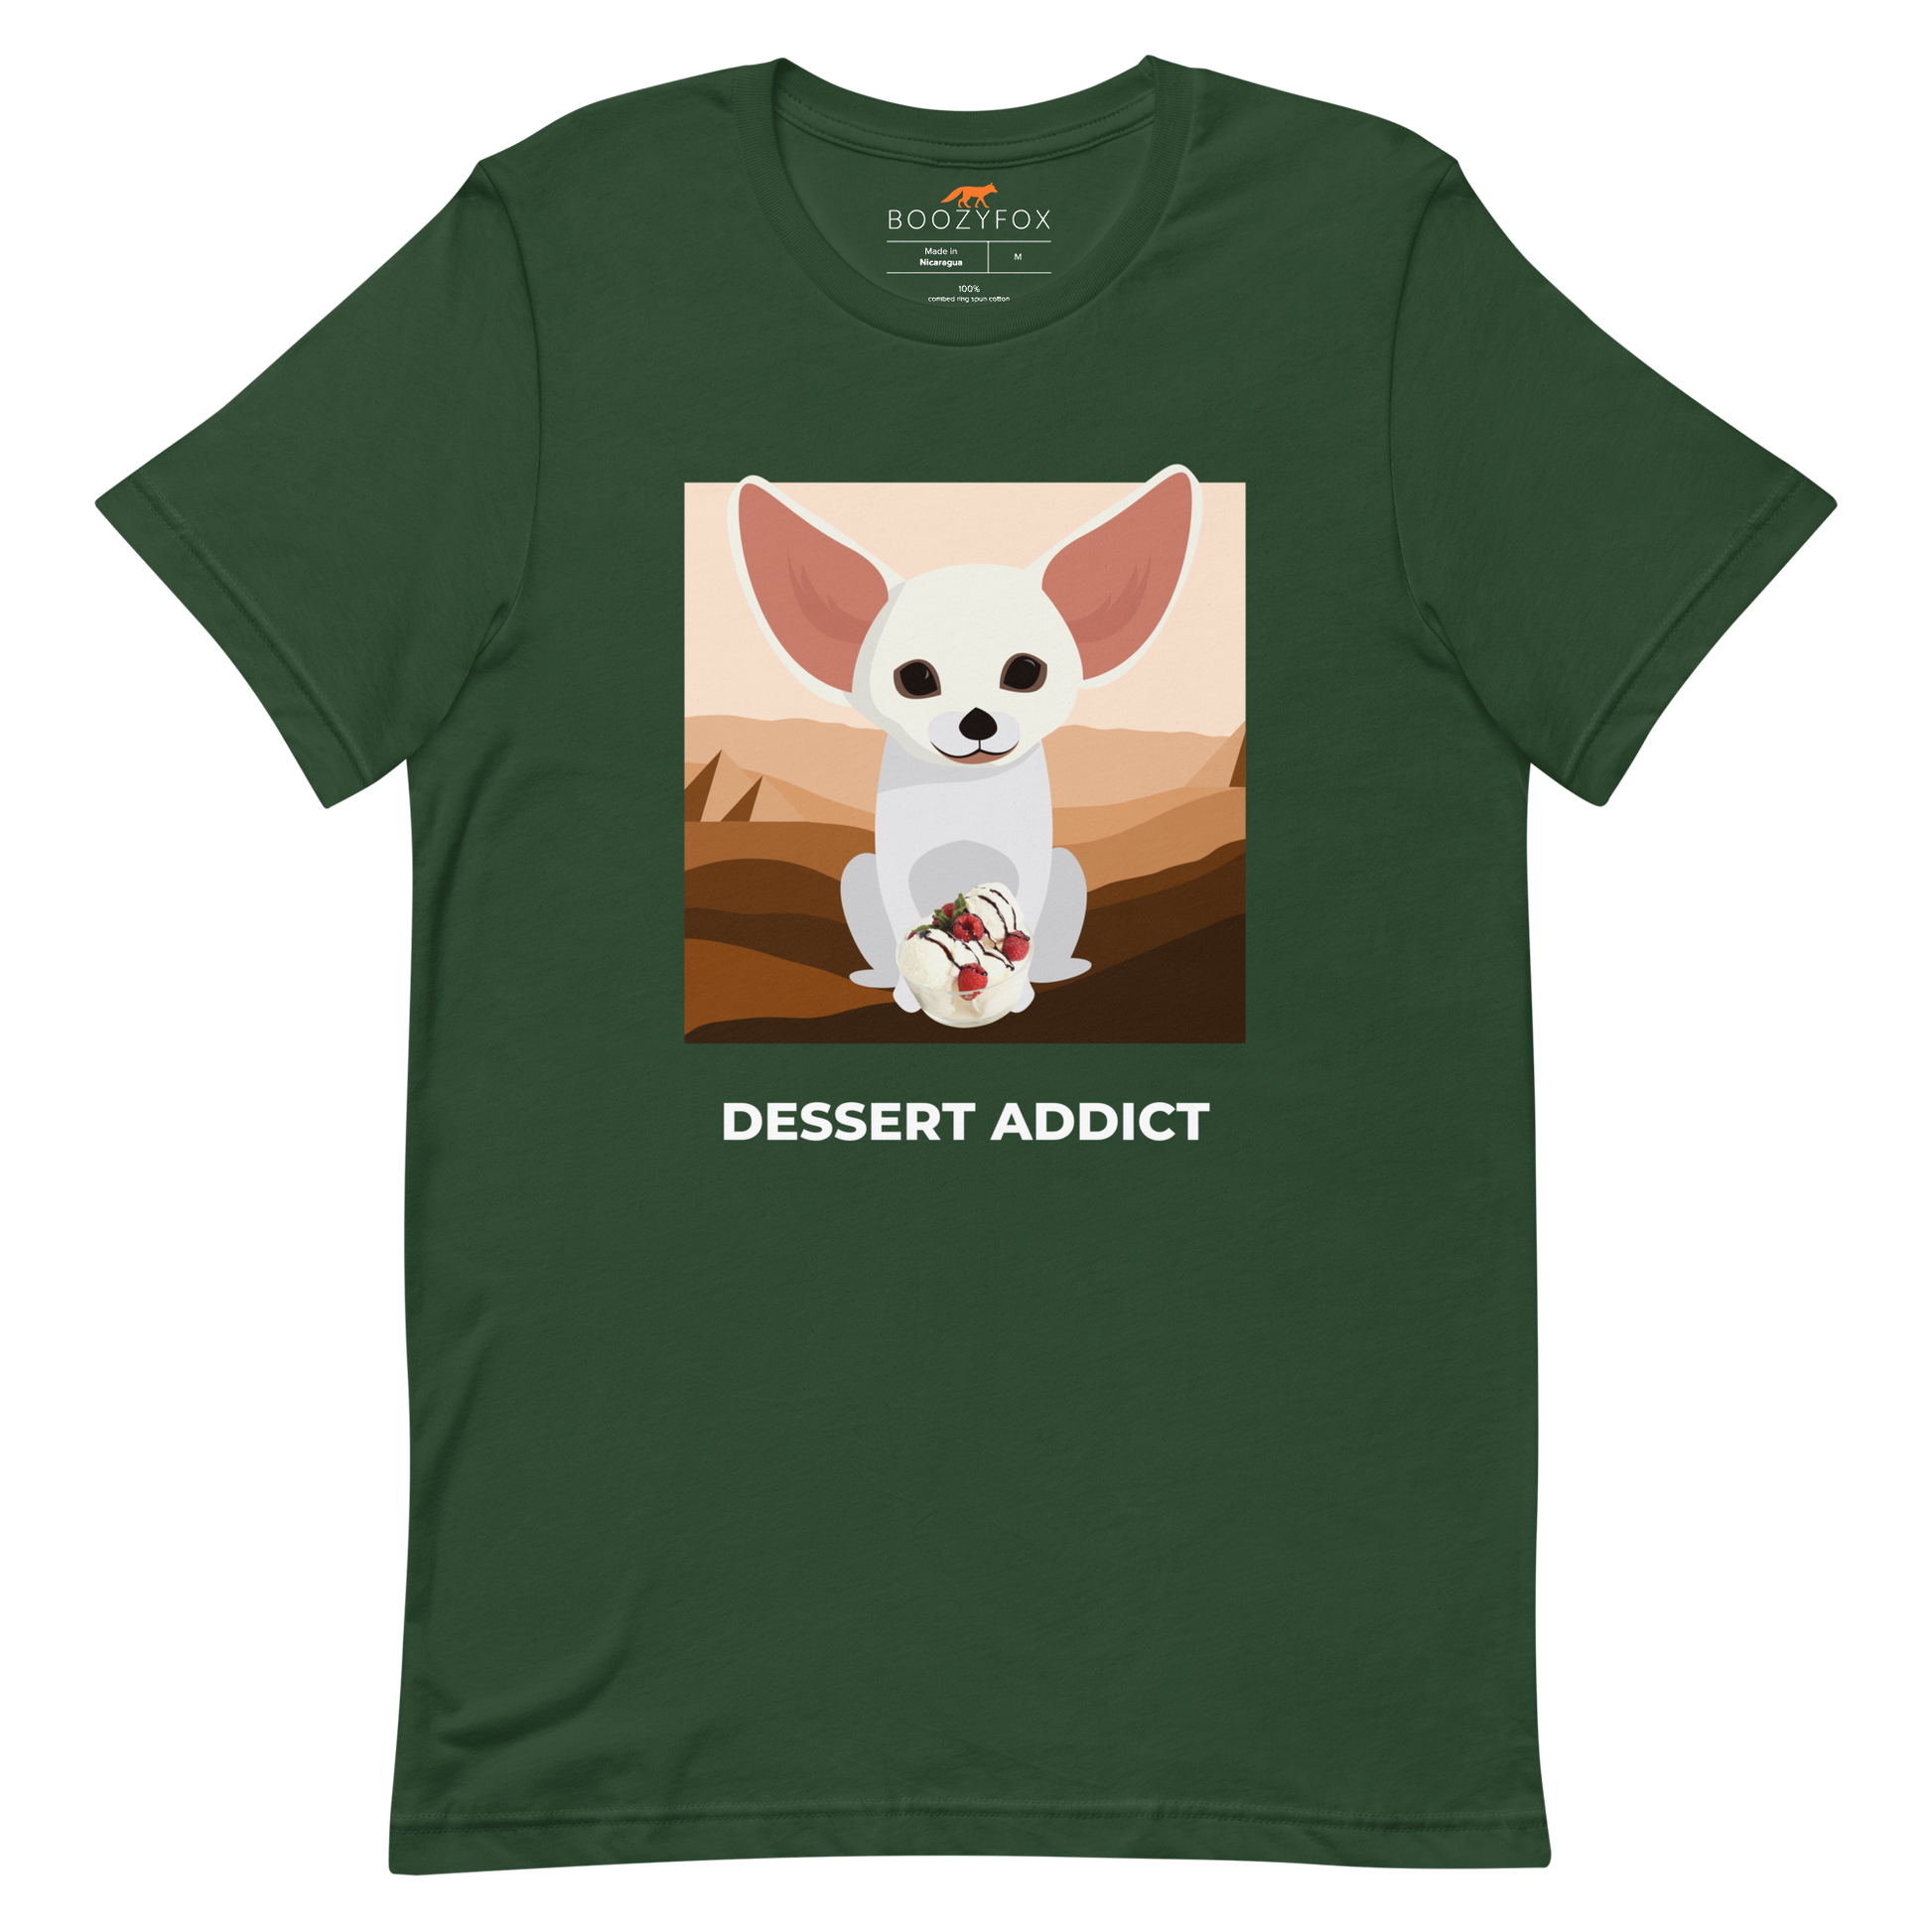 Forest Green Premium Fennec Fox T-Shirt featuring an adorable Dessert Addict graphic on the chest - Cute Graphic Fennec Fox Tees - Boozy Fox